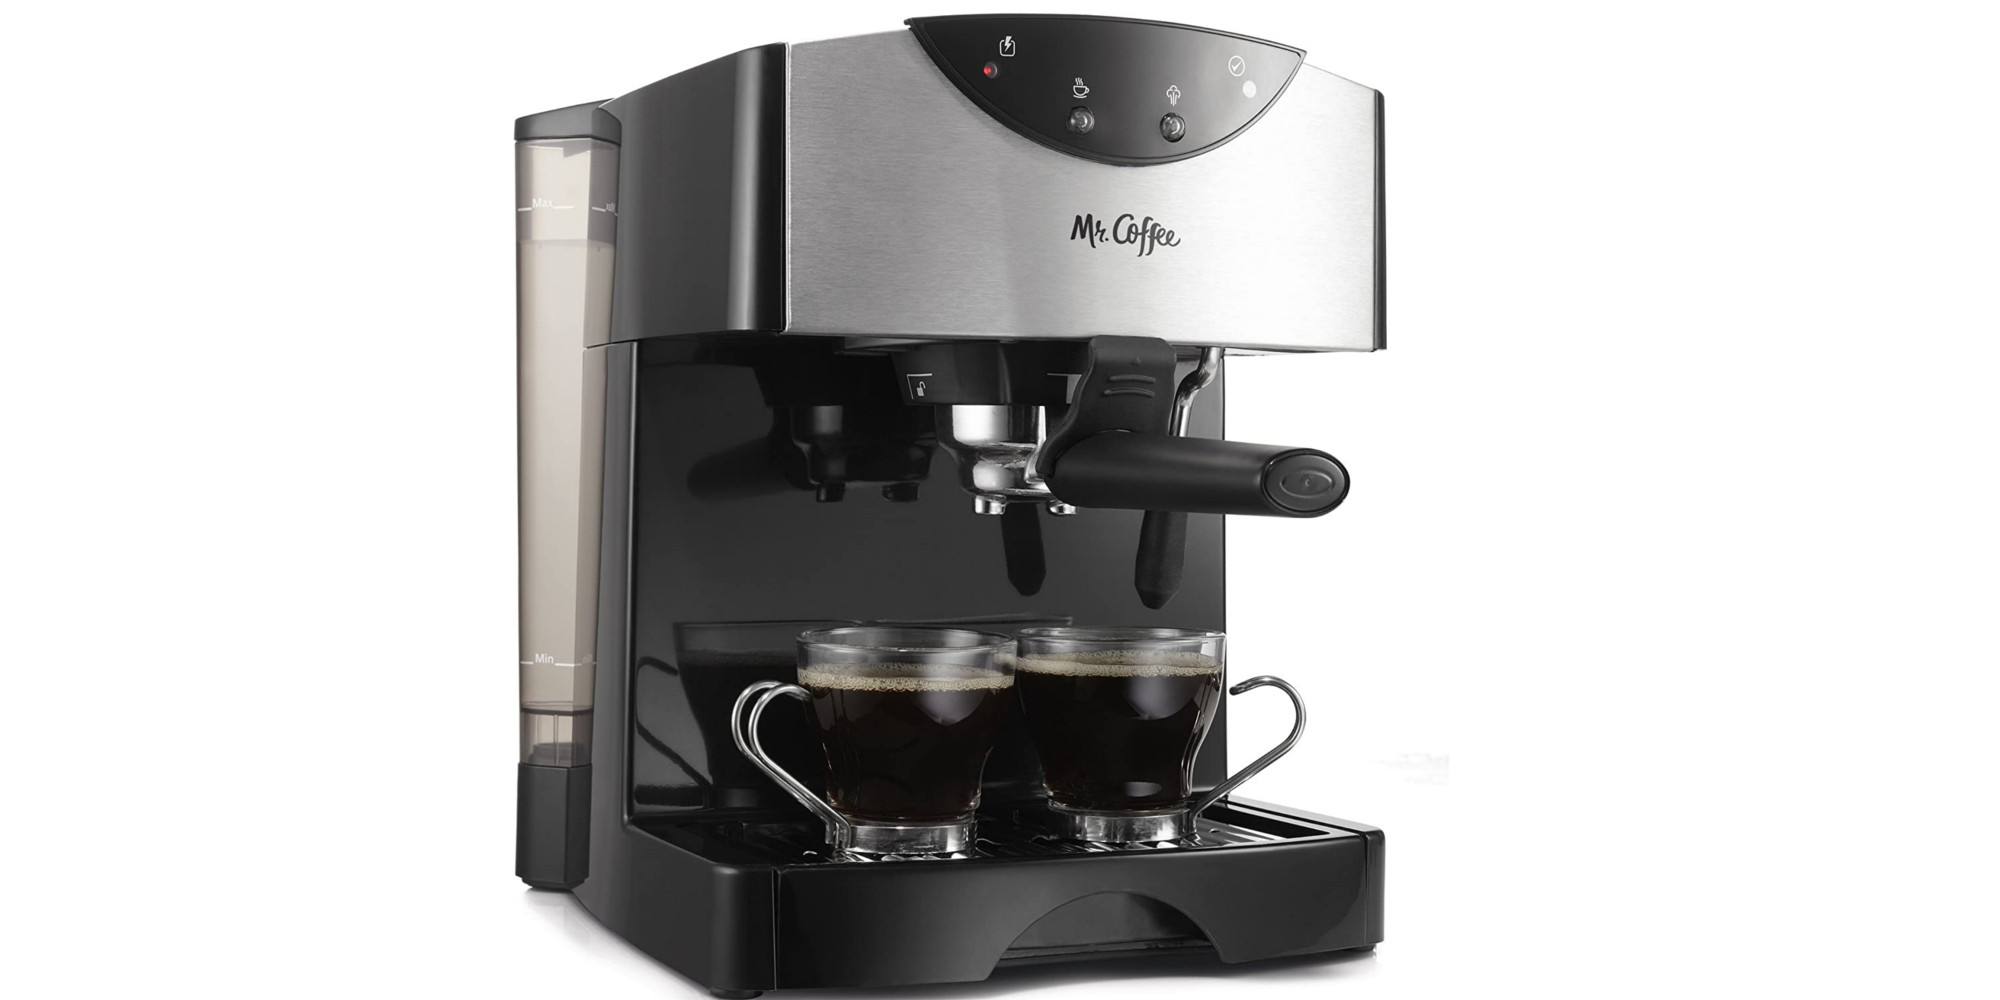 This automatic dual-shot espresso machine is down to $77 at